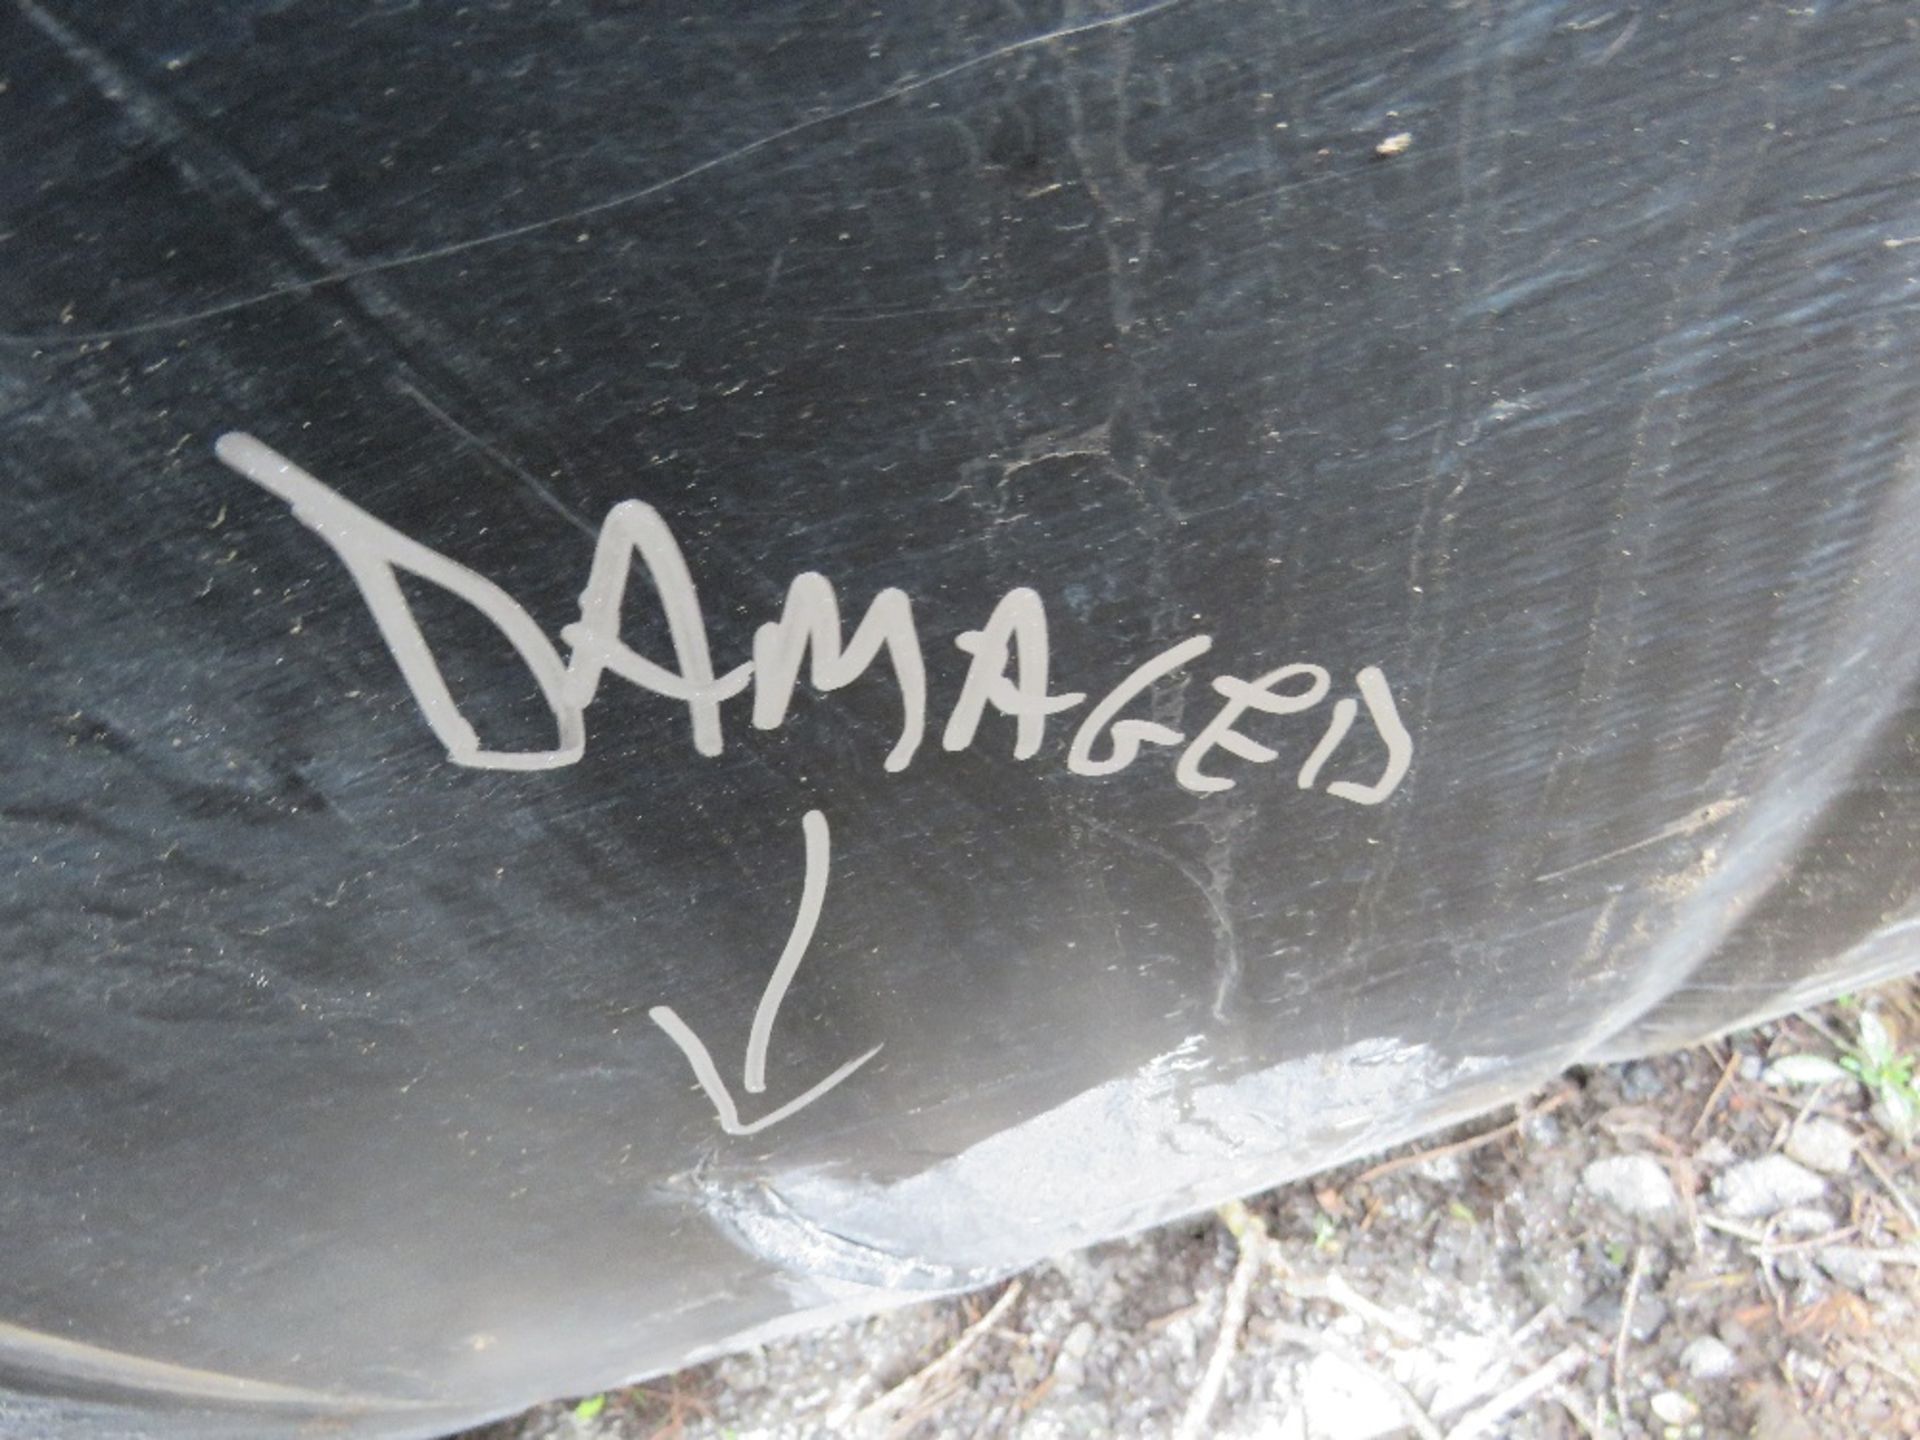 EXTRA LARGE WATER STORAGE TANK 10FT HEIGHT X 9FT DIAMETER APPROX. DAMAGED IN THE MIDDLE AS SHOWN. EX - Image 7 of 10